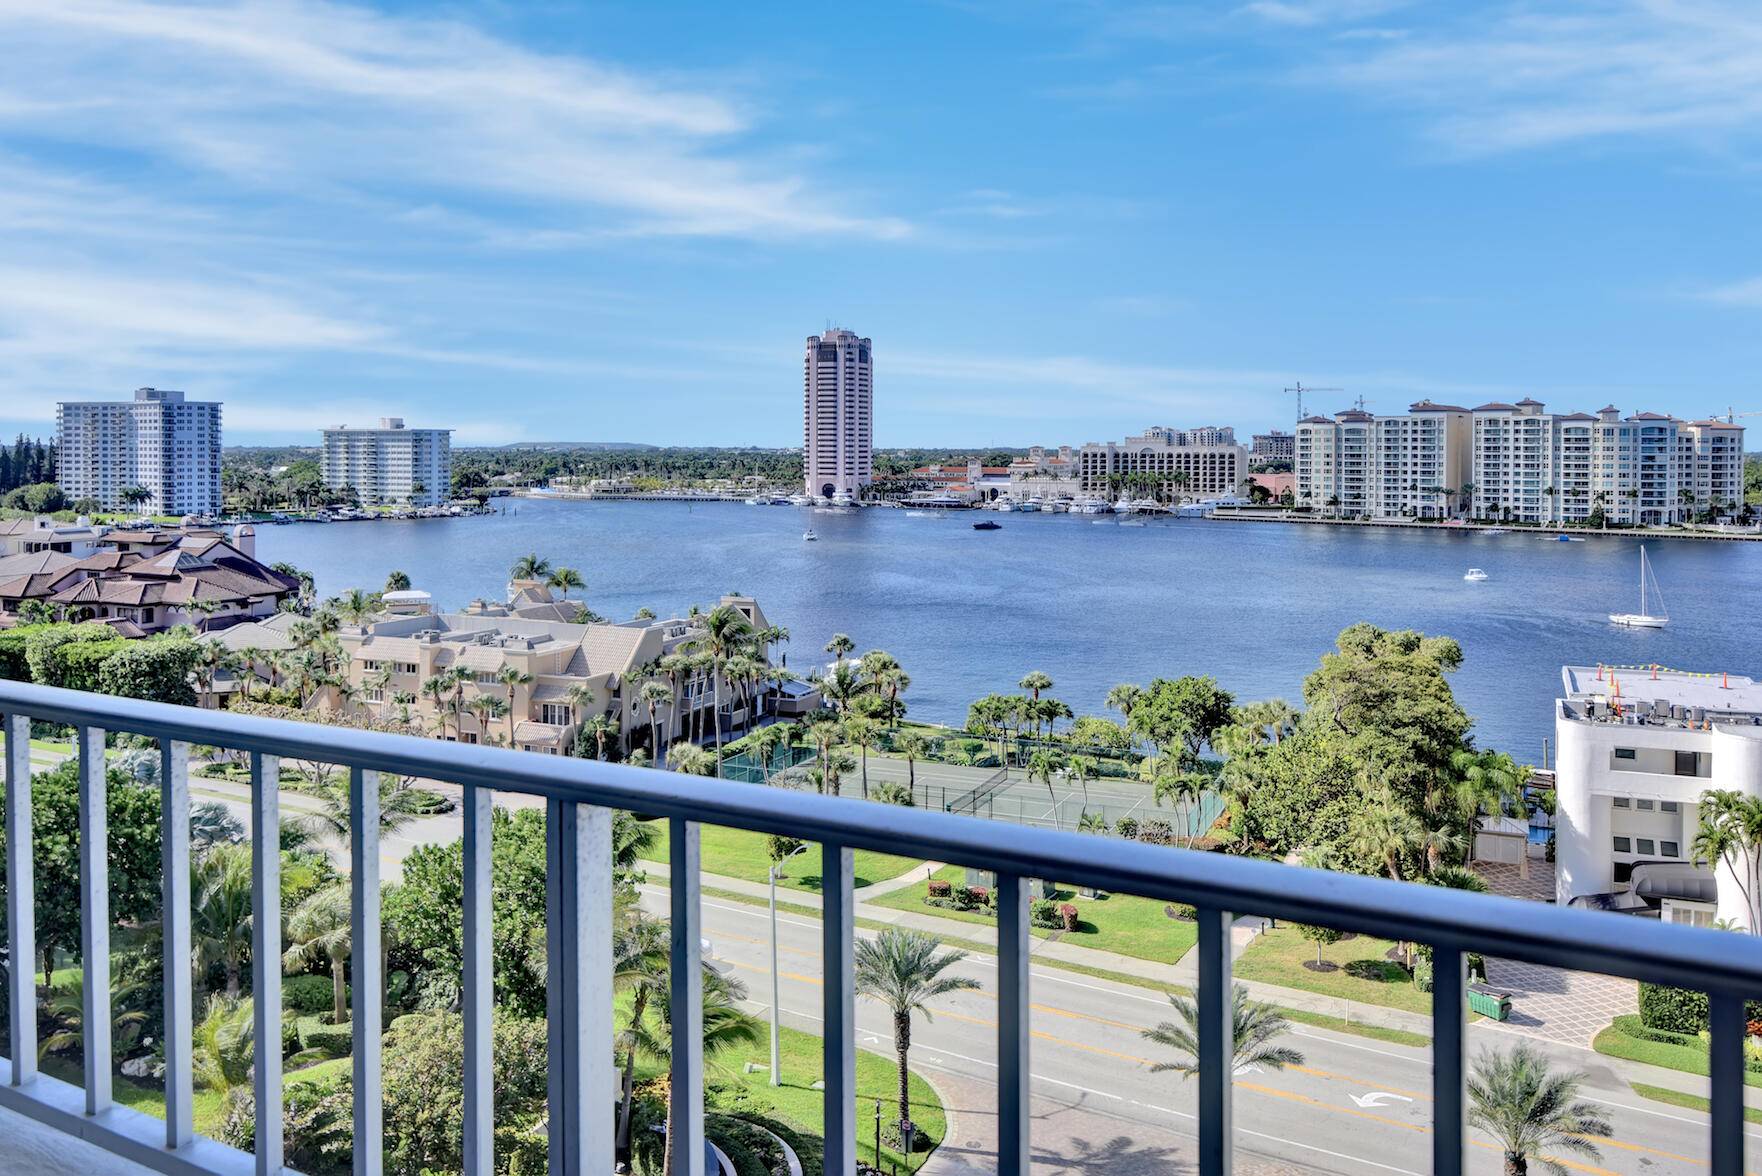 Waterfront two bedroom, two bathroom residence, offering spectacular views of Lake Boca, the city, and breathtaking sunsets.